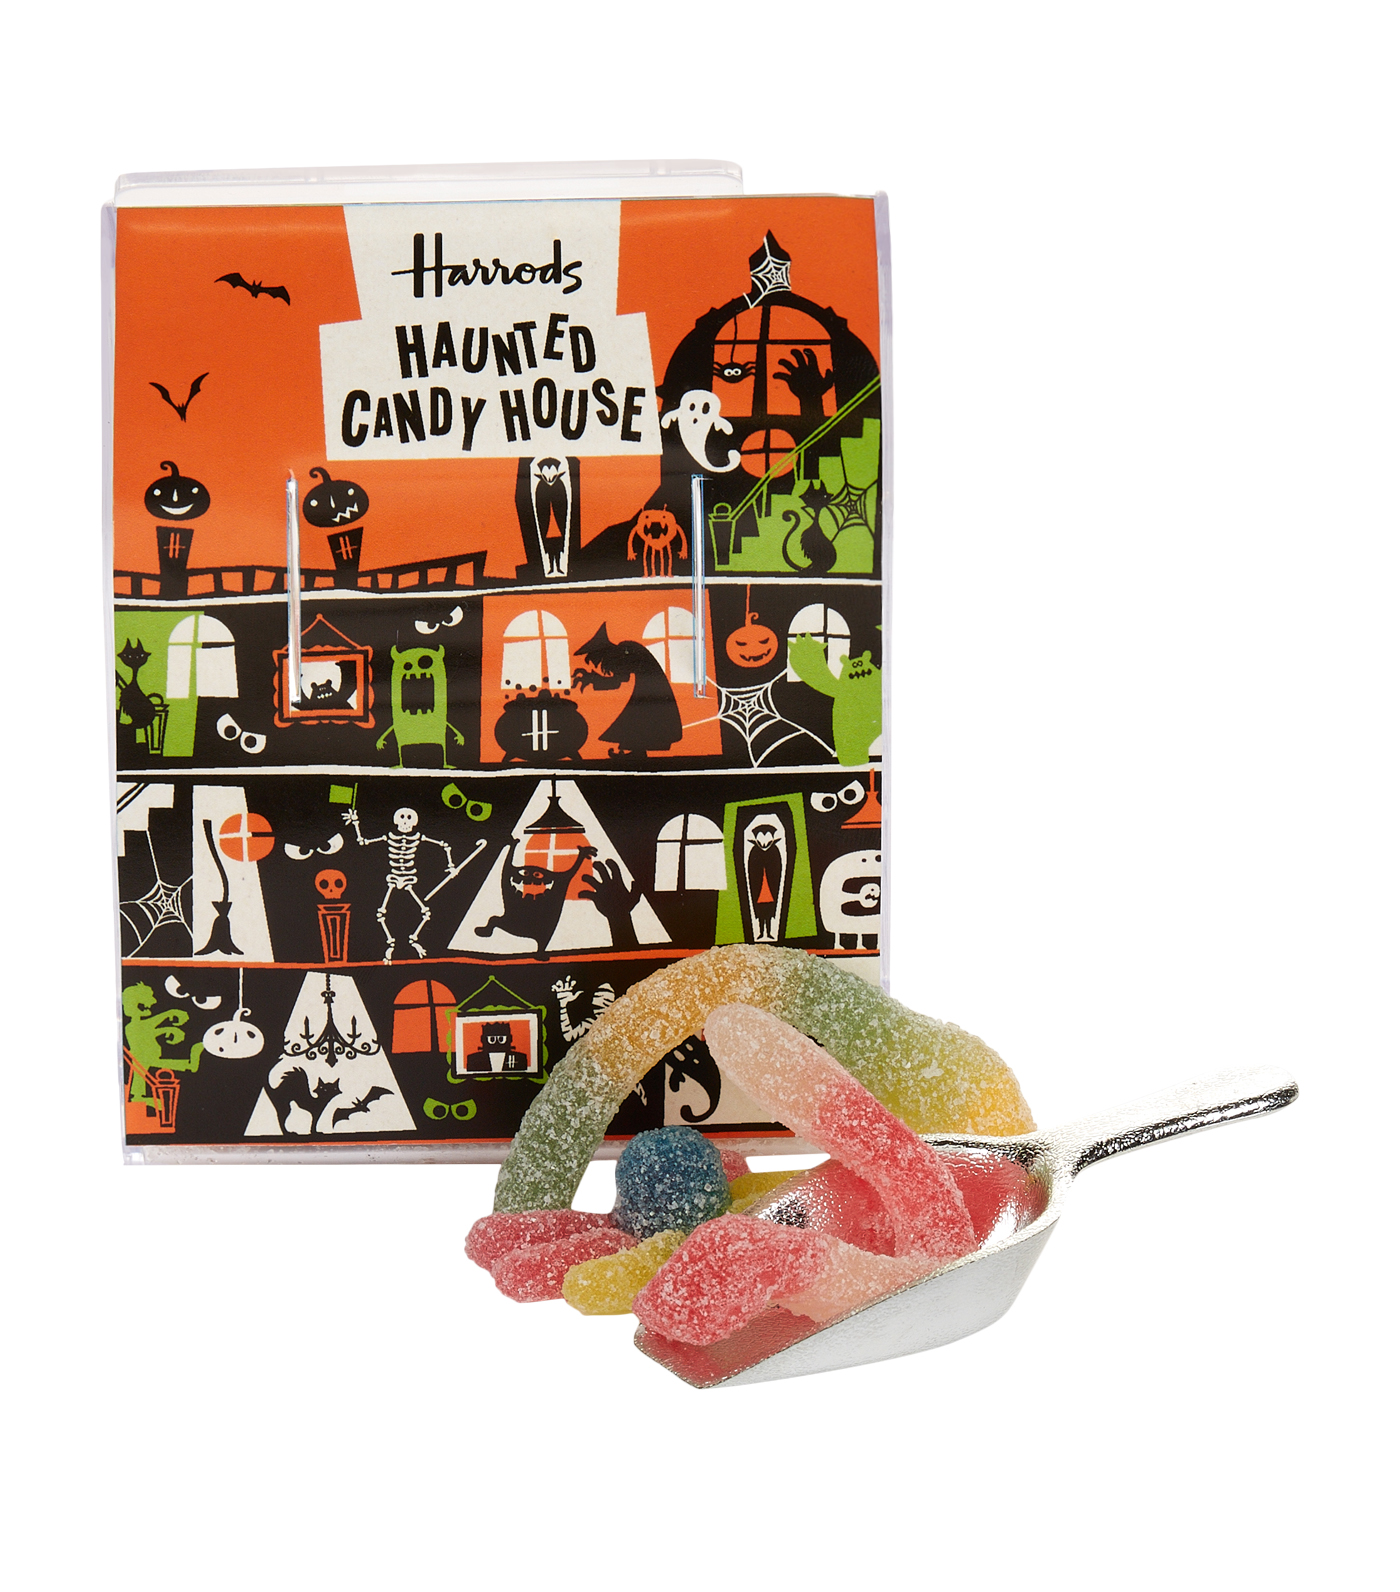 Haunted candy house (Harrods/PA)